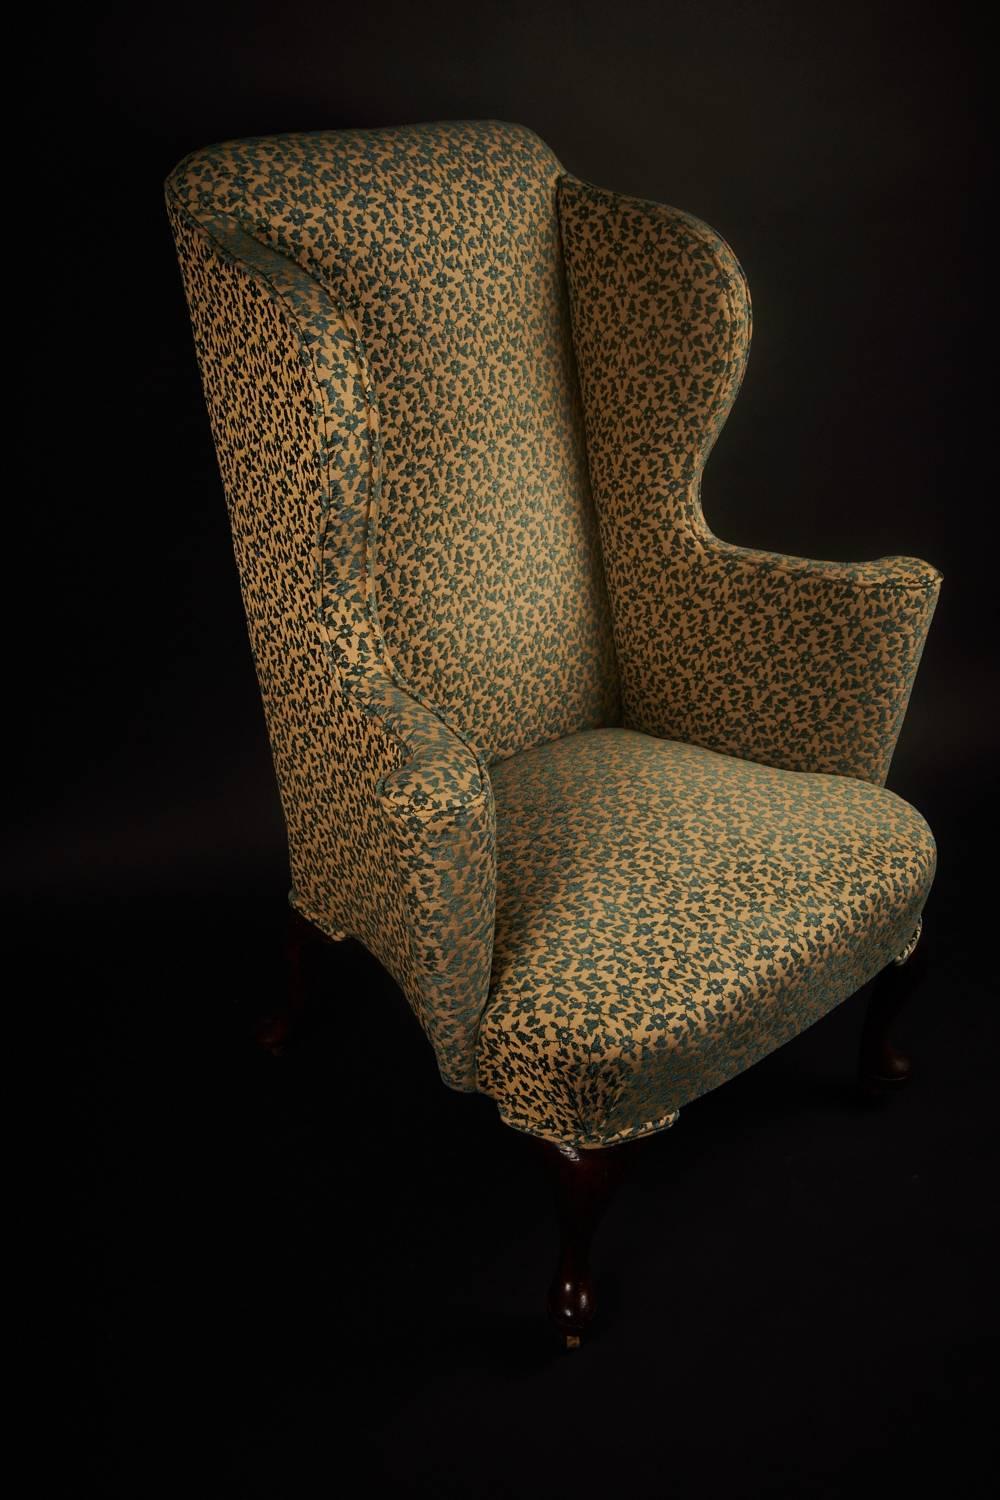 English High Sided George II Mahogany Wingback Armchair with Scrolling Arms 18th Century